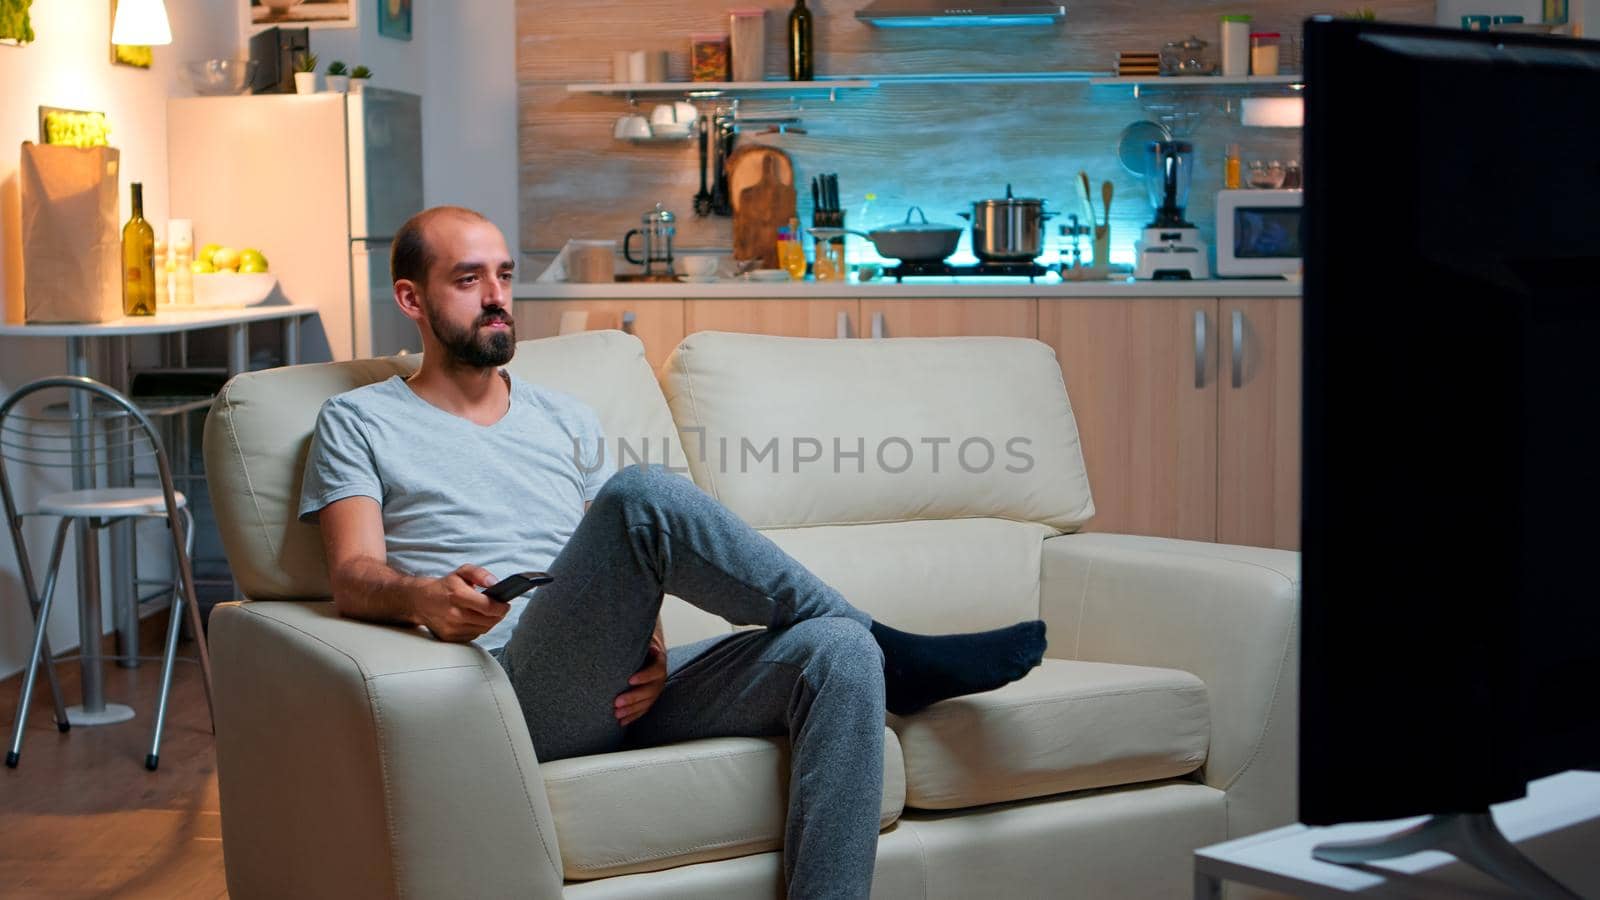 Concentrated man with beard watching movie show by DCStudio